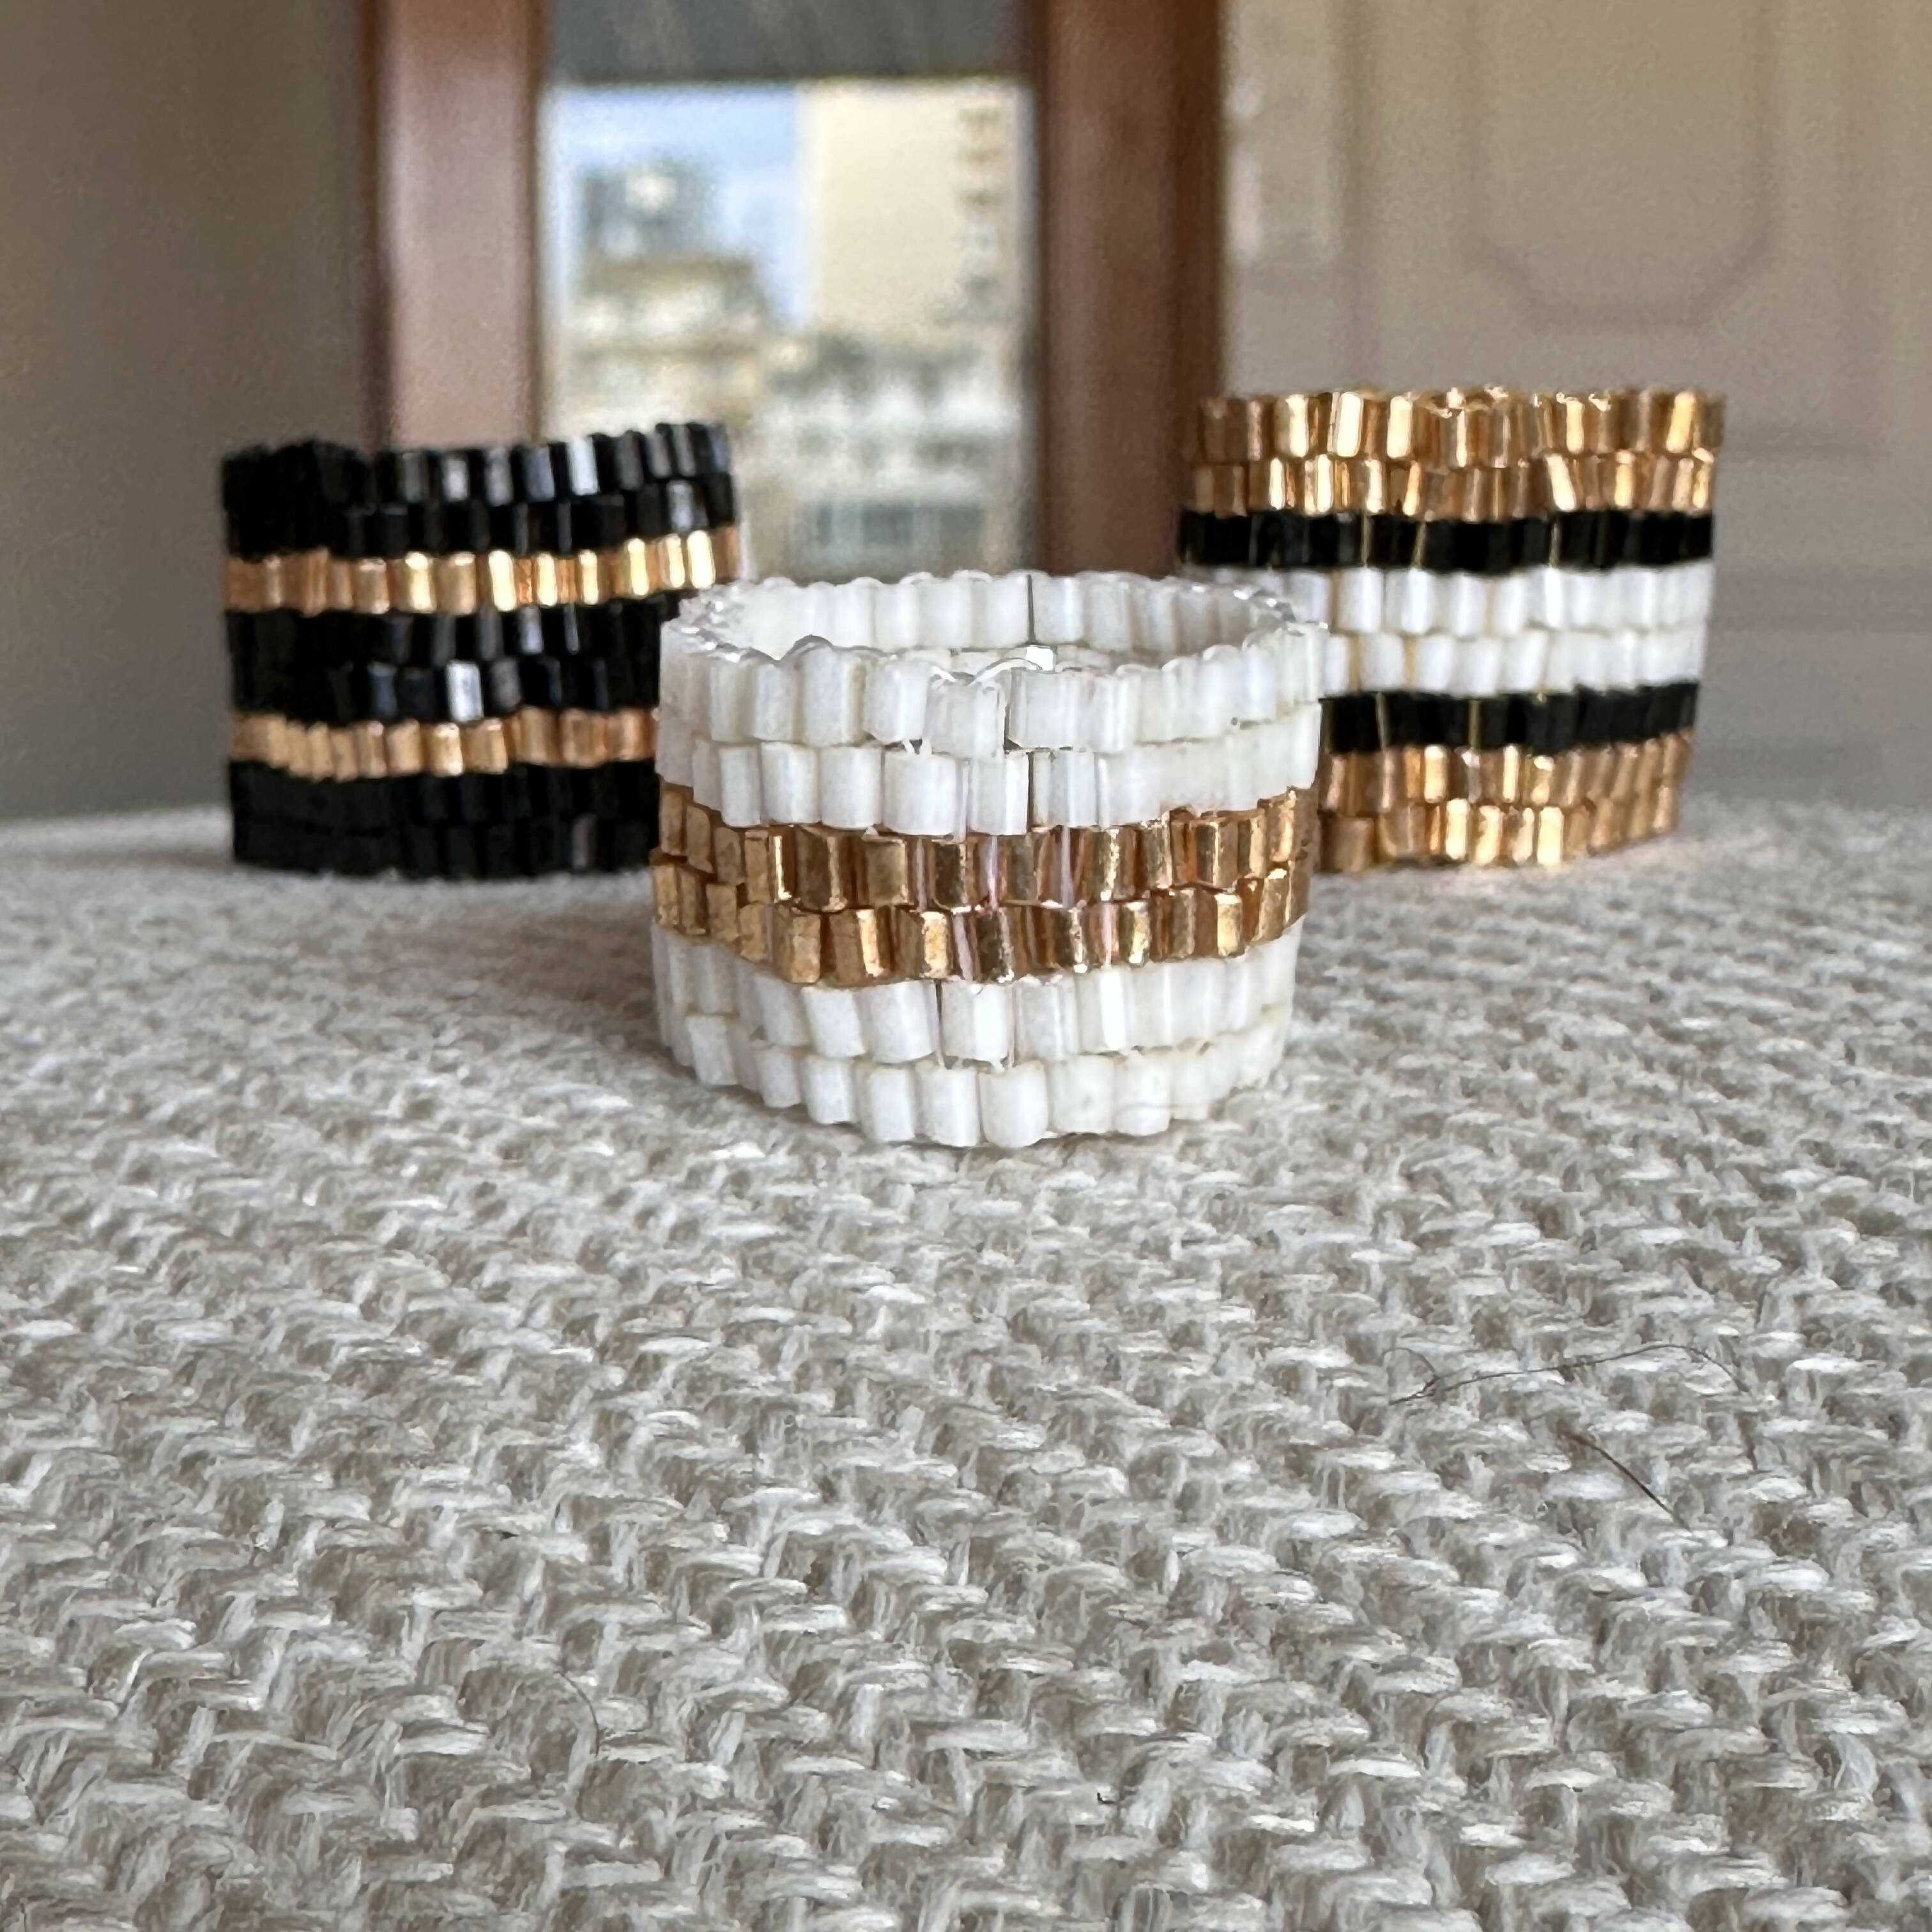 The PUT A RING ON IT collection: Lines serie 2, 8 rows!